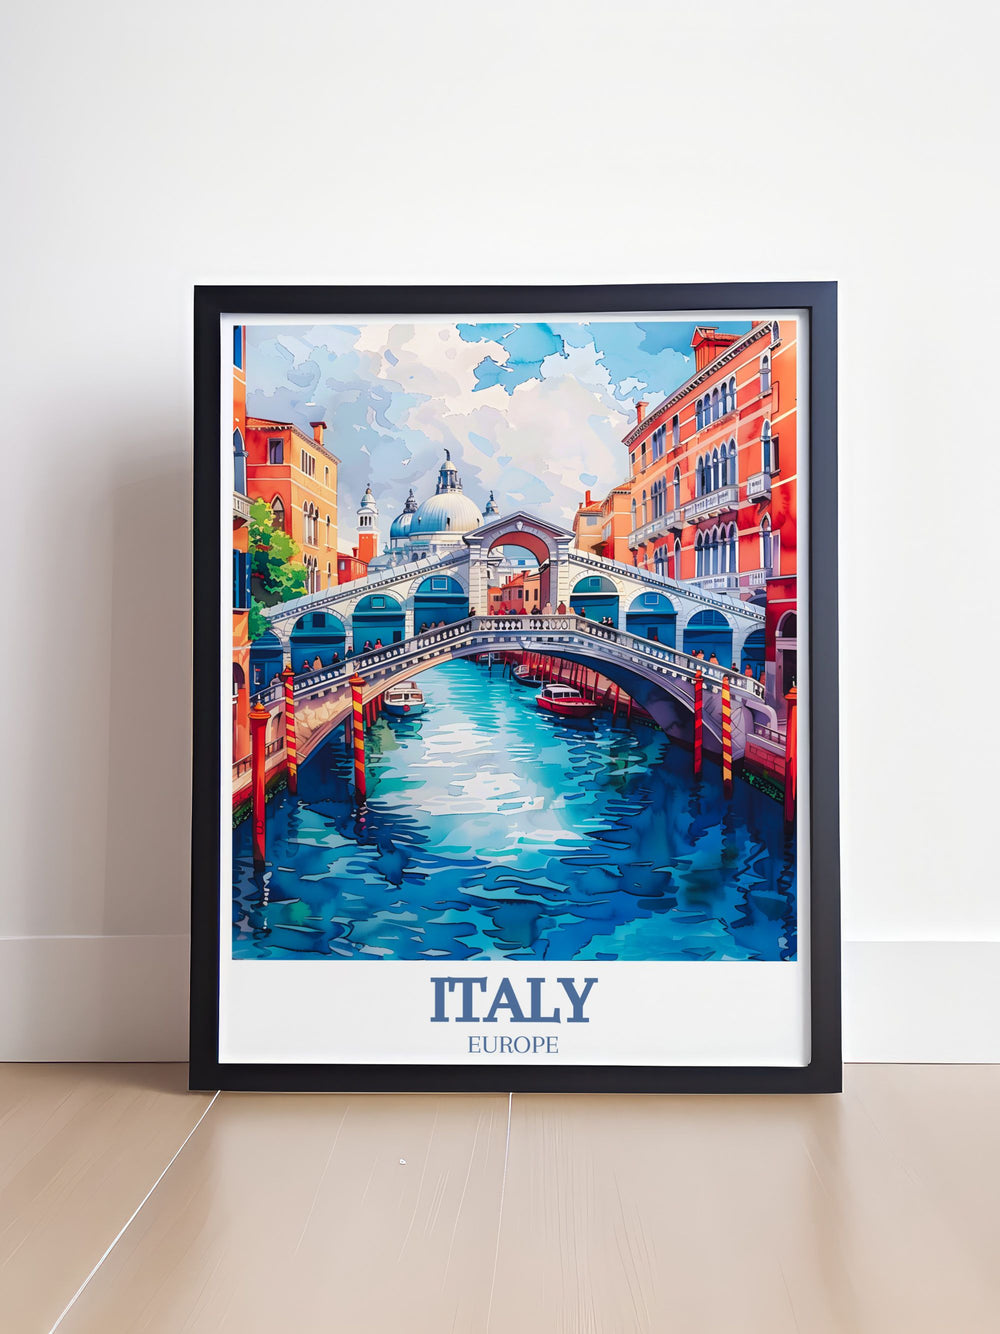 This travel poster beautifully illustrates the Grand Canal, Rialto Bridge, and St. Marks Basilica in Venice, capturing the essence of Italys rich history and architectural splendor.